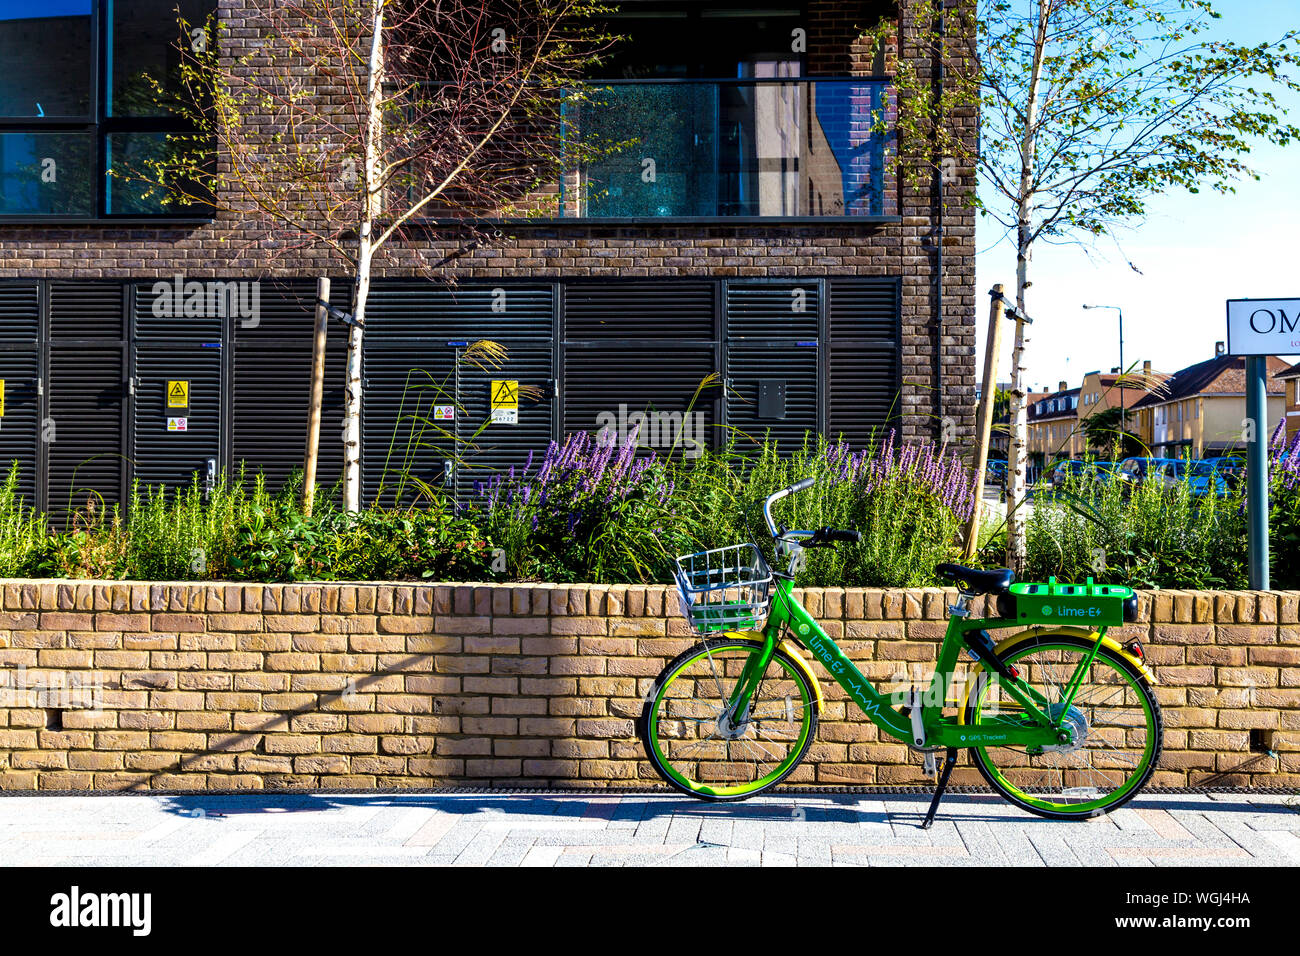 Lime-E electric bicycle parked on the street, London, UK Stock Photo